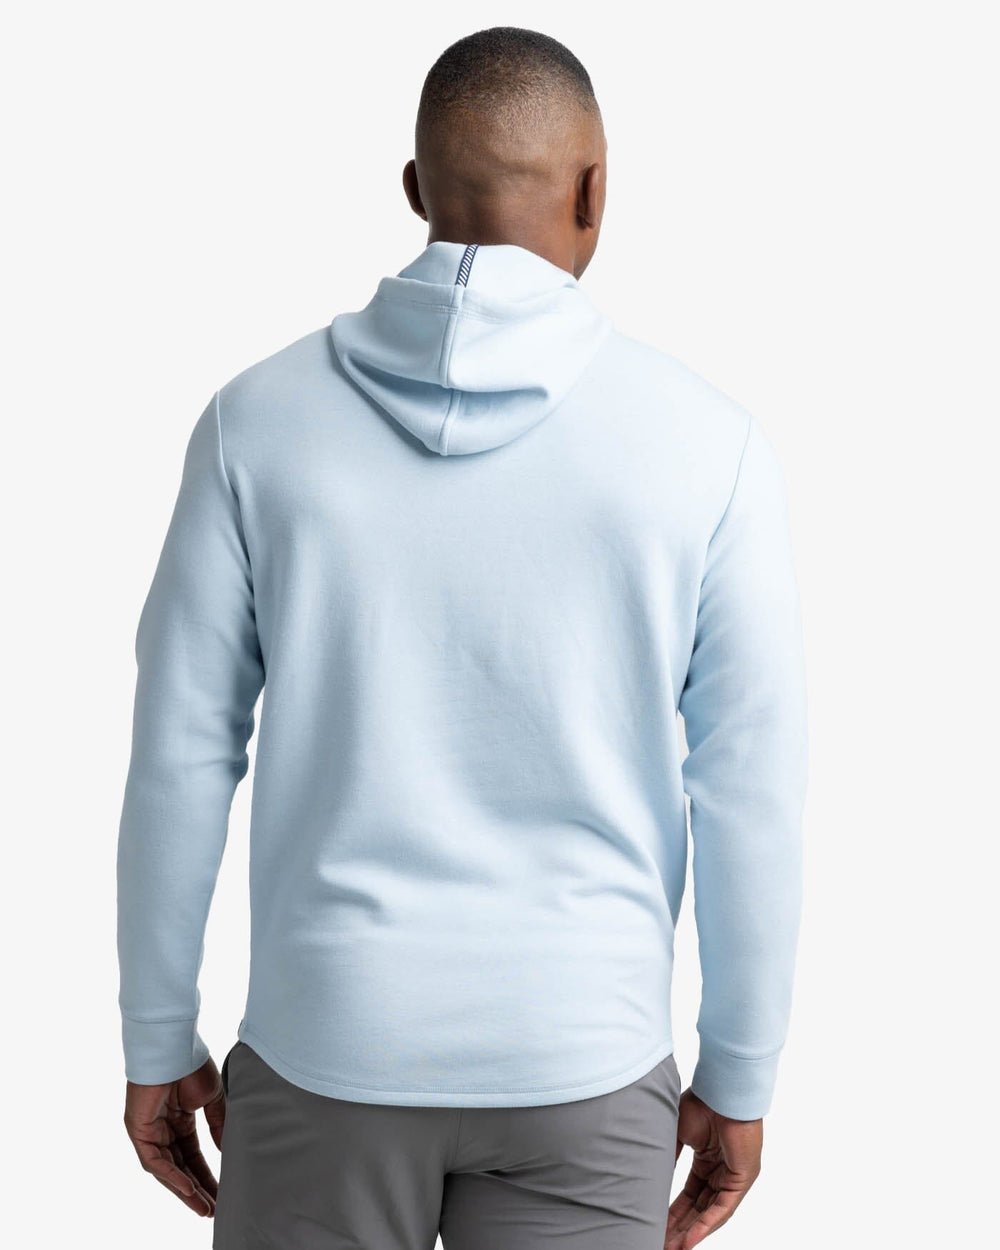 The back view of the Southern Tide Stratford Heather Interlock Hoodie by Southern Tide - Heather Dream Blue